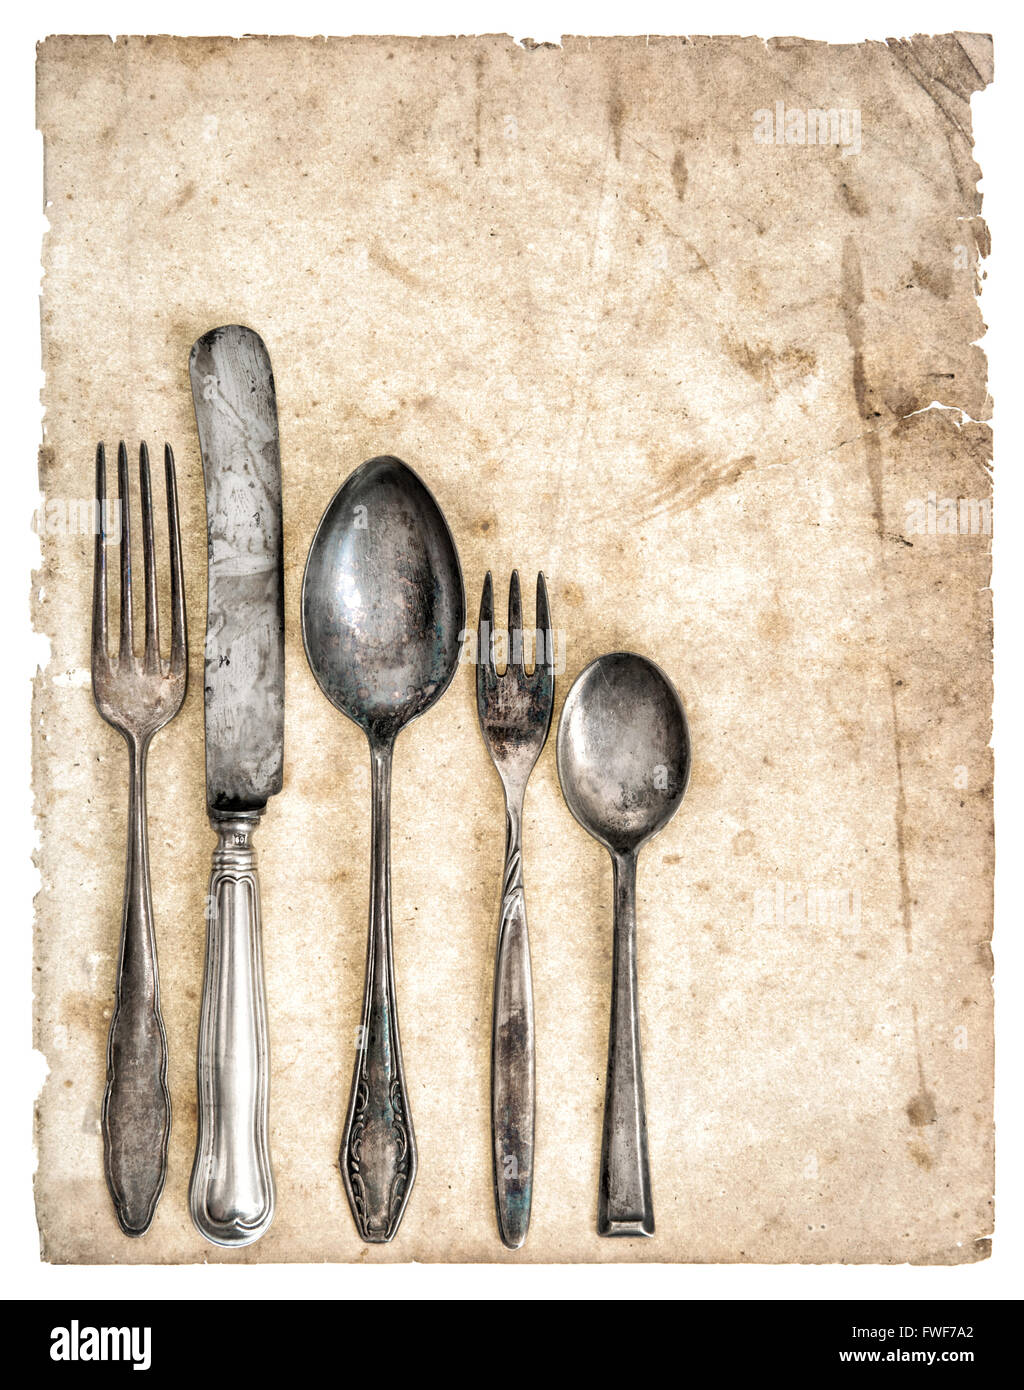 Antique cutlery and old cook book page. Retro kitchen utensils knife, fork and spoons Stock Photo